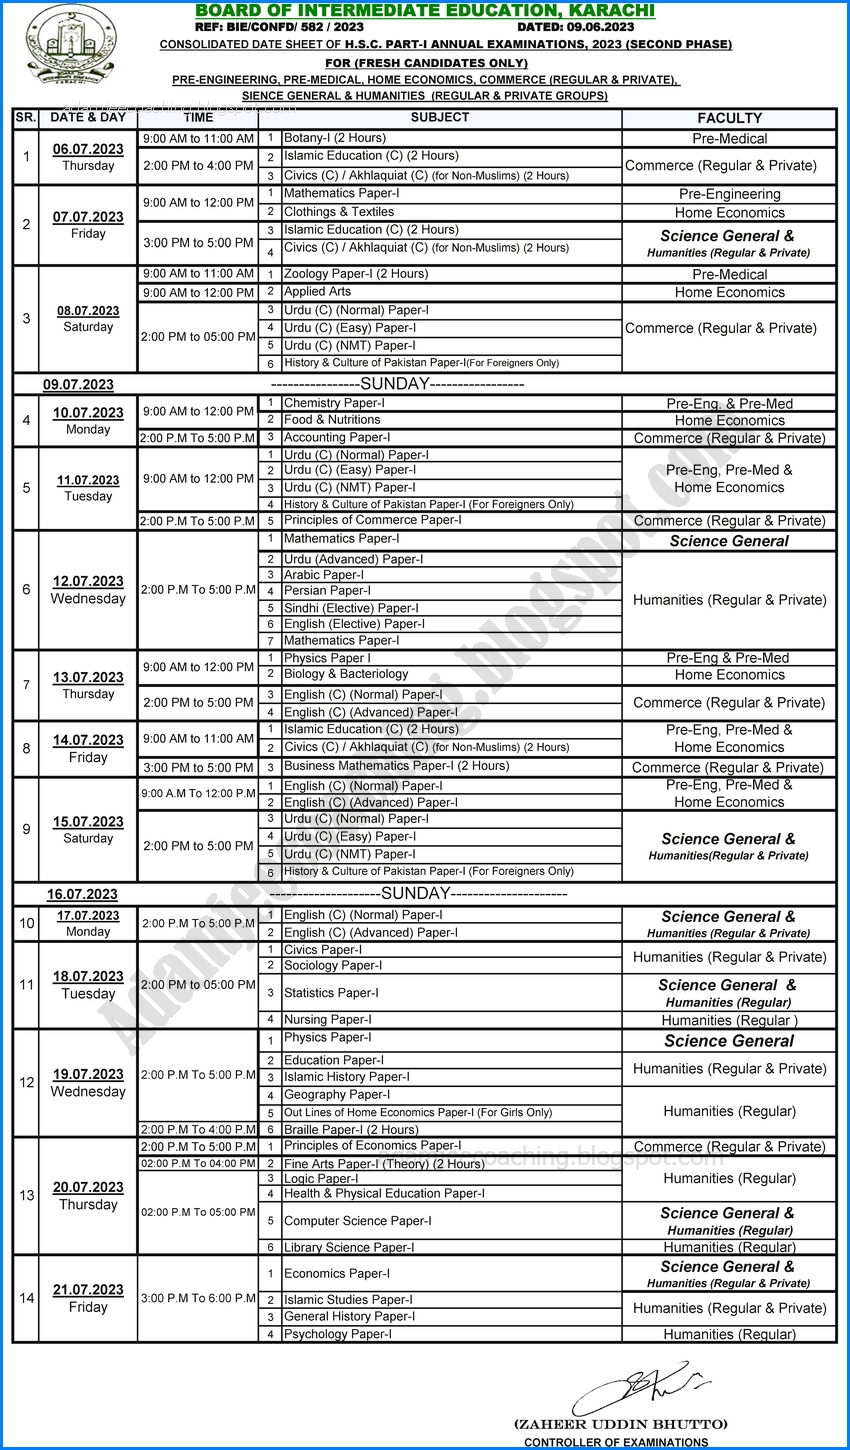 date-sheet-for-class-11th-science-general-and-humanities-group-annual-examinations-2023